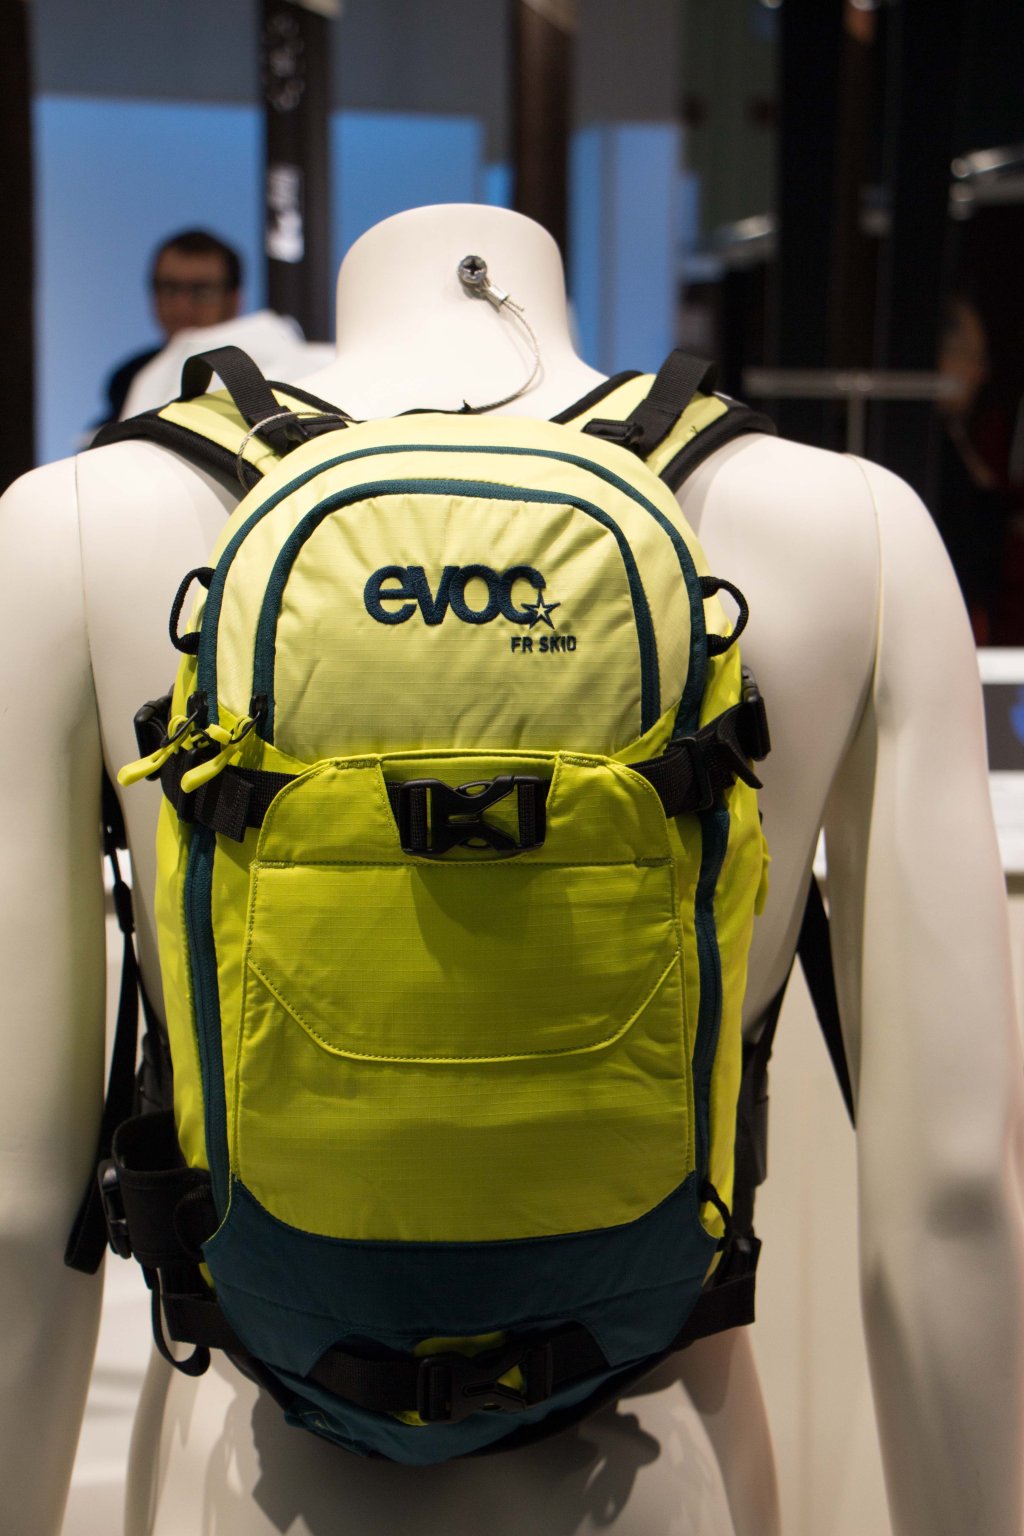 Also honored with an ISPO Gold Award: the Evoc FR Skid rucksack